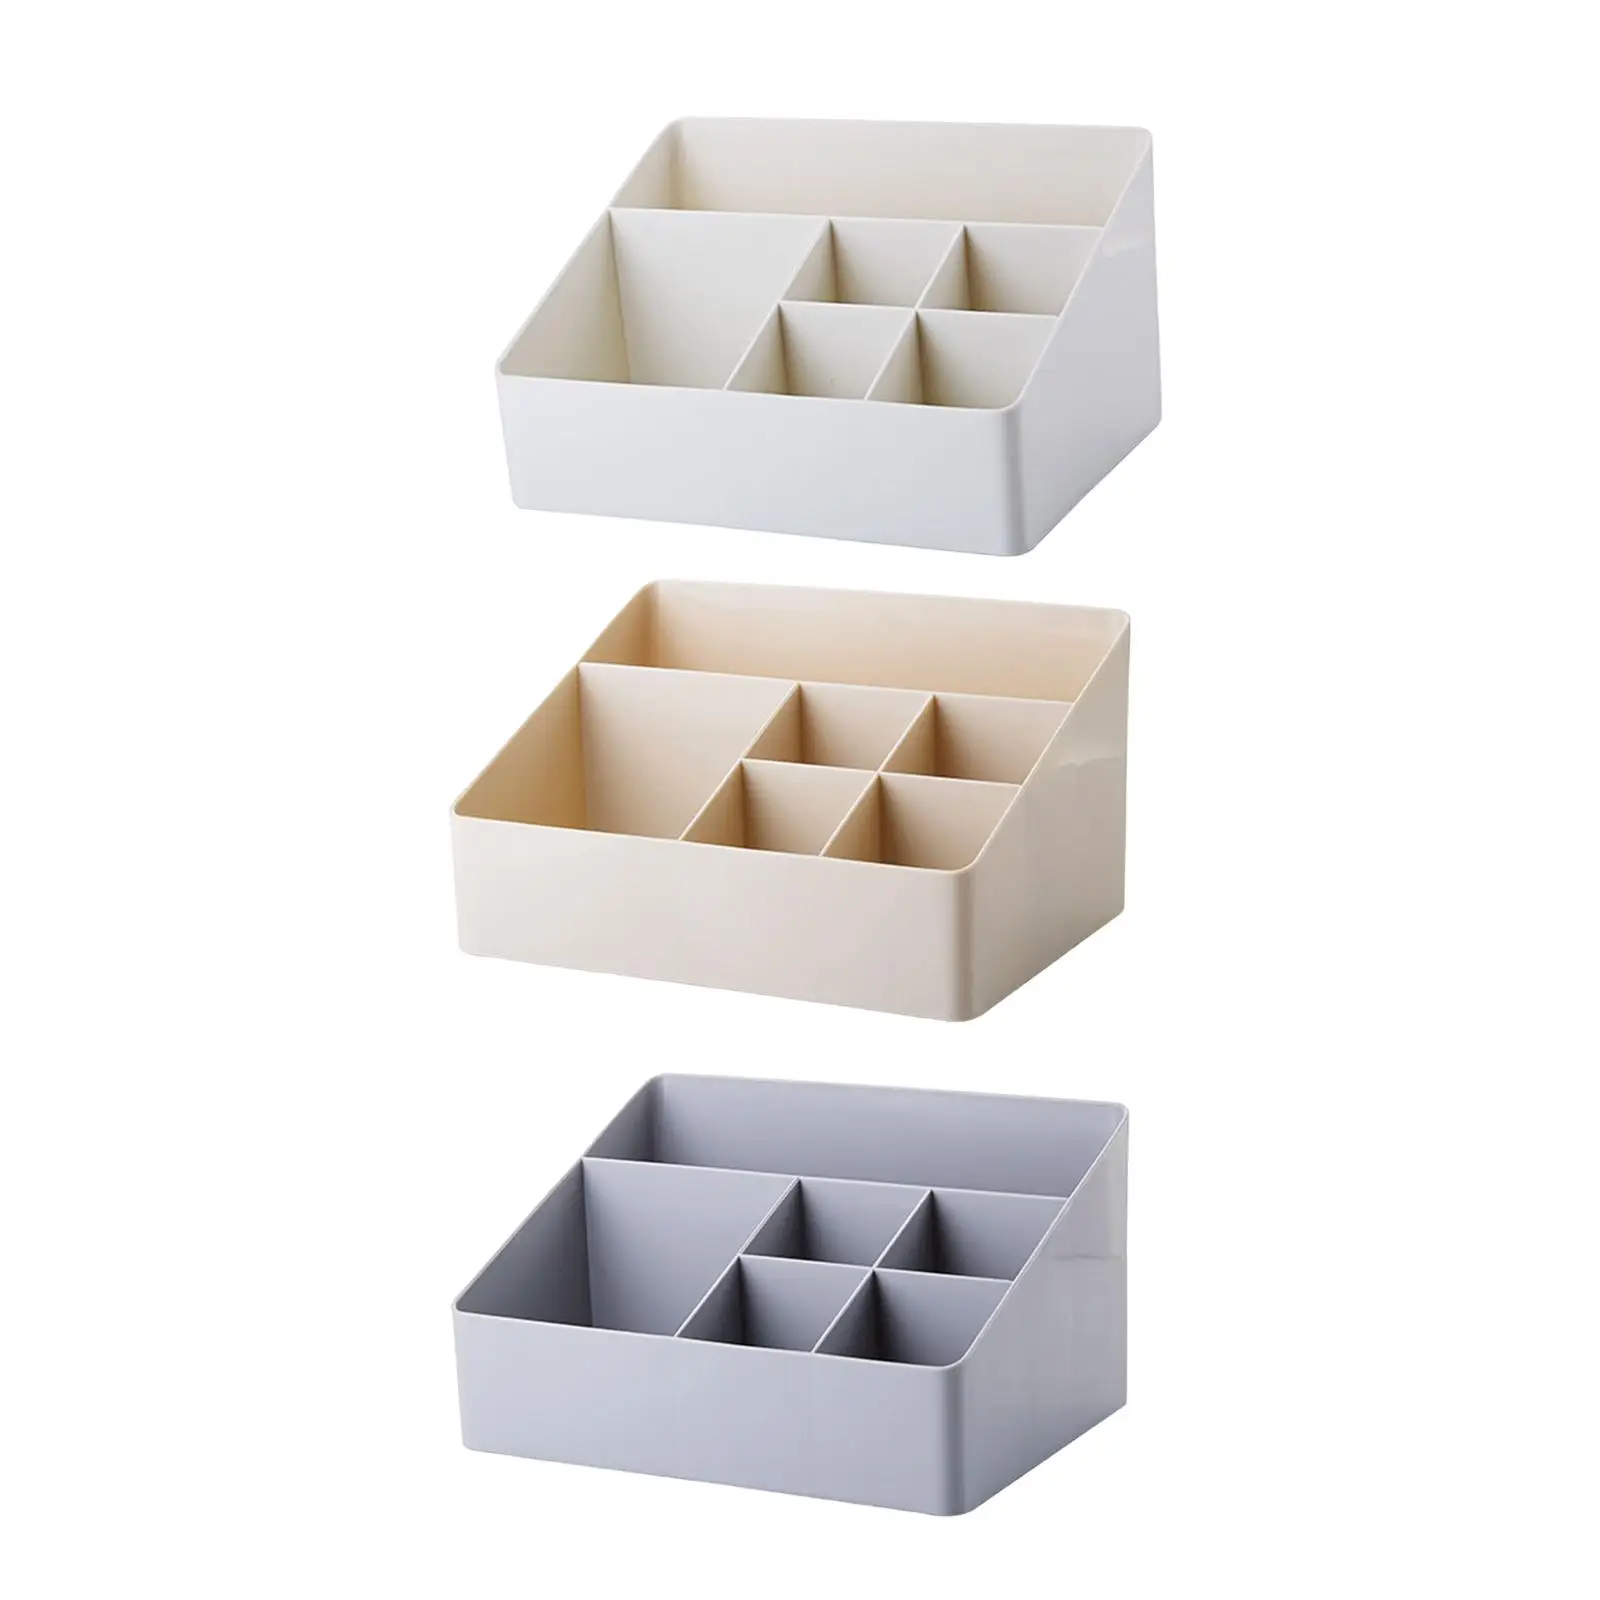 Cosmetic Storage Box Skin Care Shelf Large Capacity Makeup Organizer Container for Bedroom Countertop Kitchen Brushes Jewelry